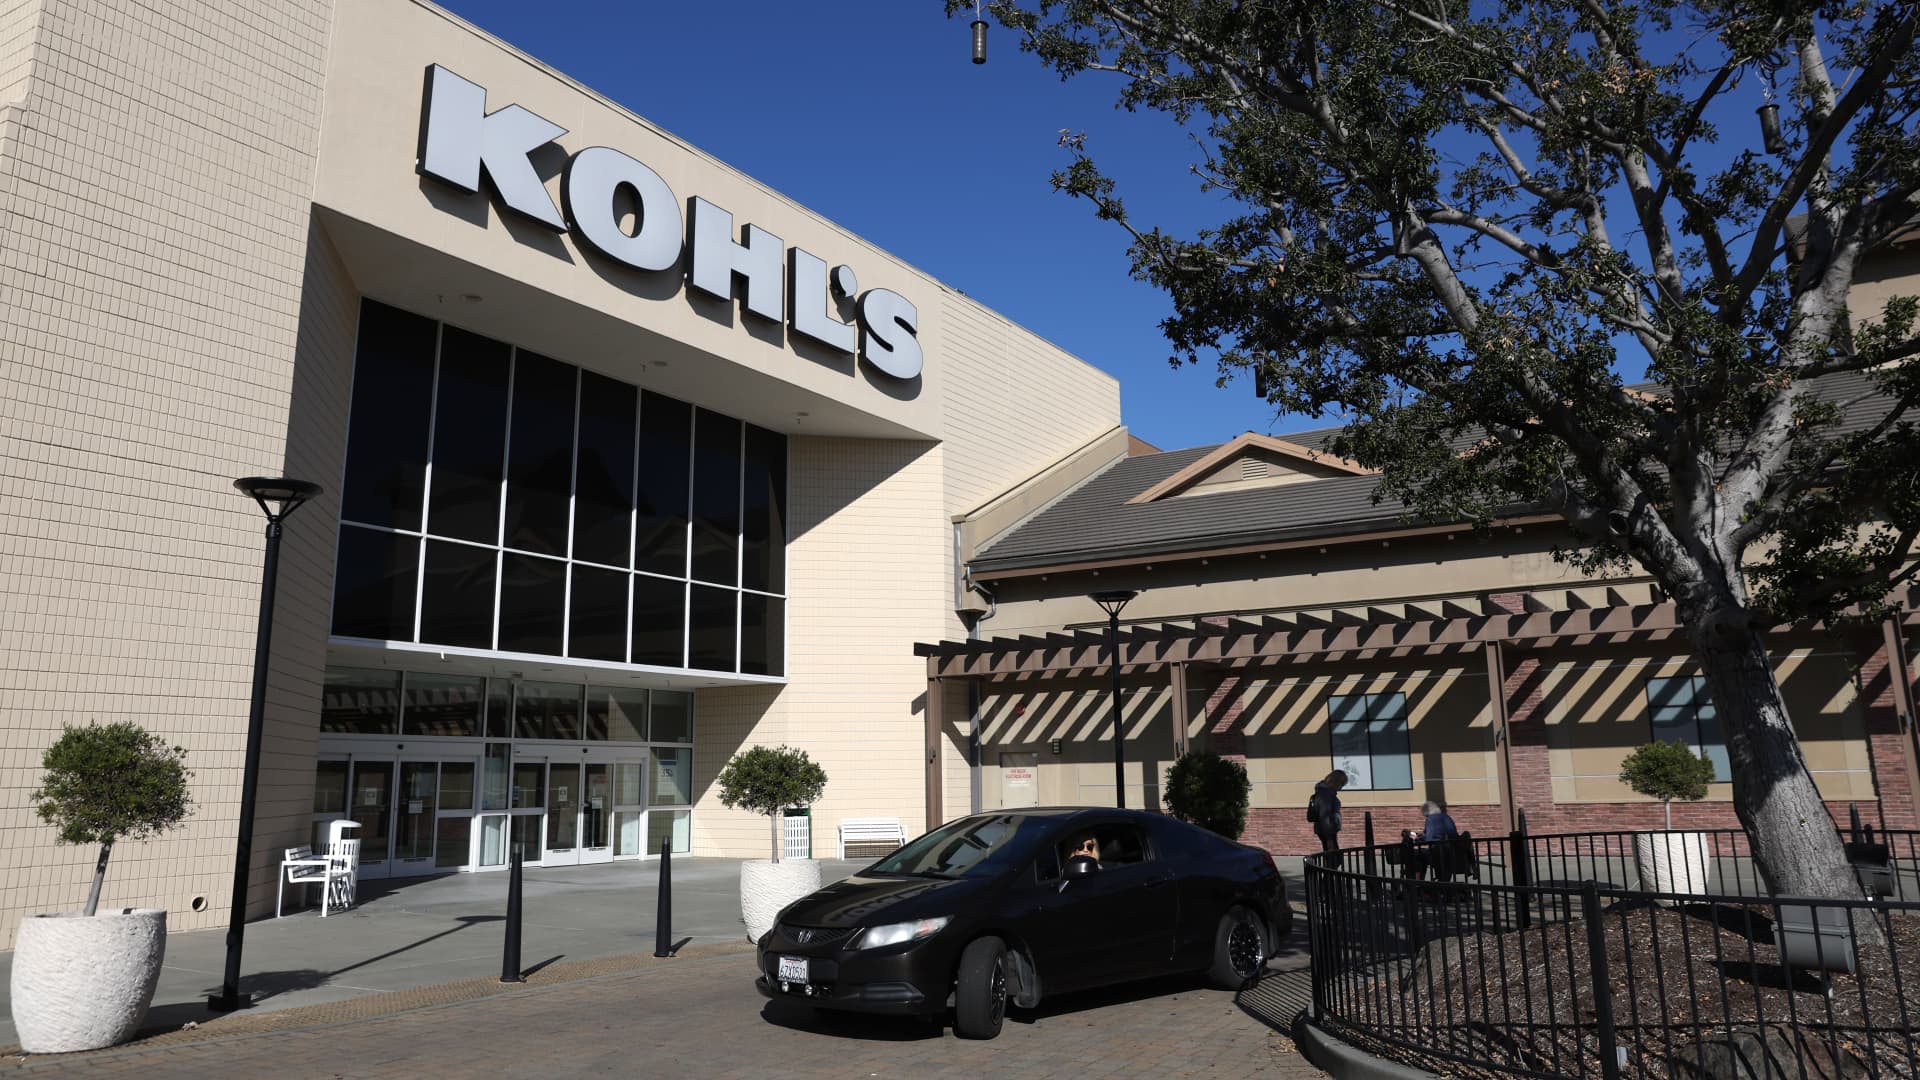 Kohl’s initiates exclusive sales talks with Franchise Group